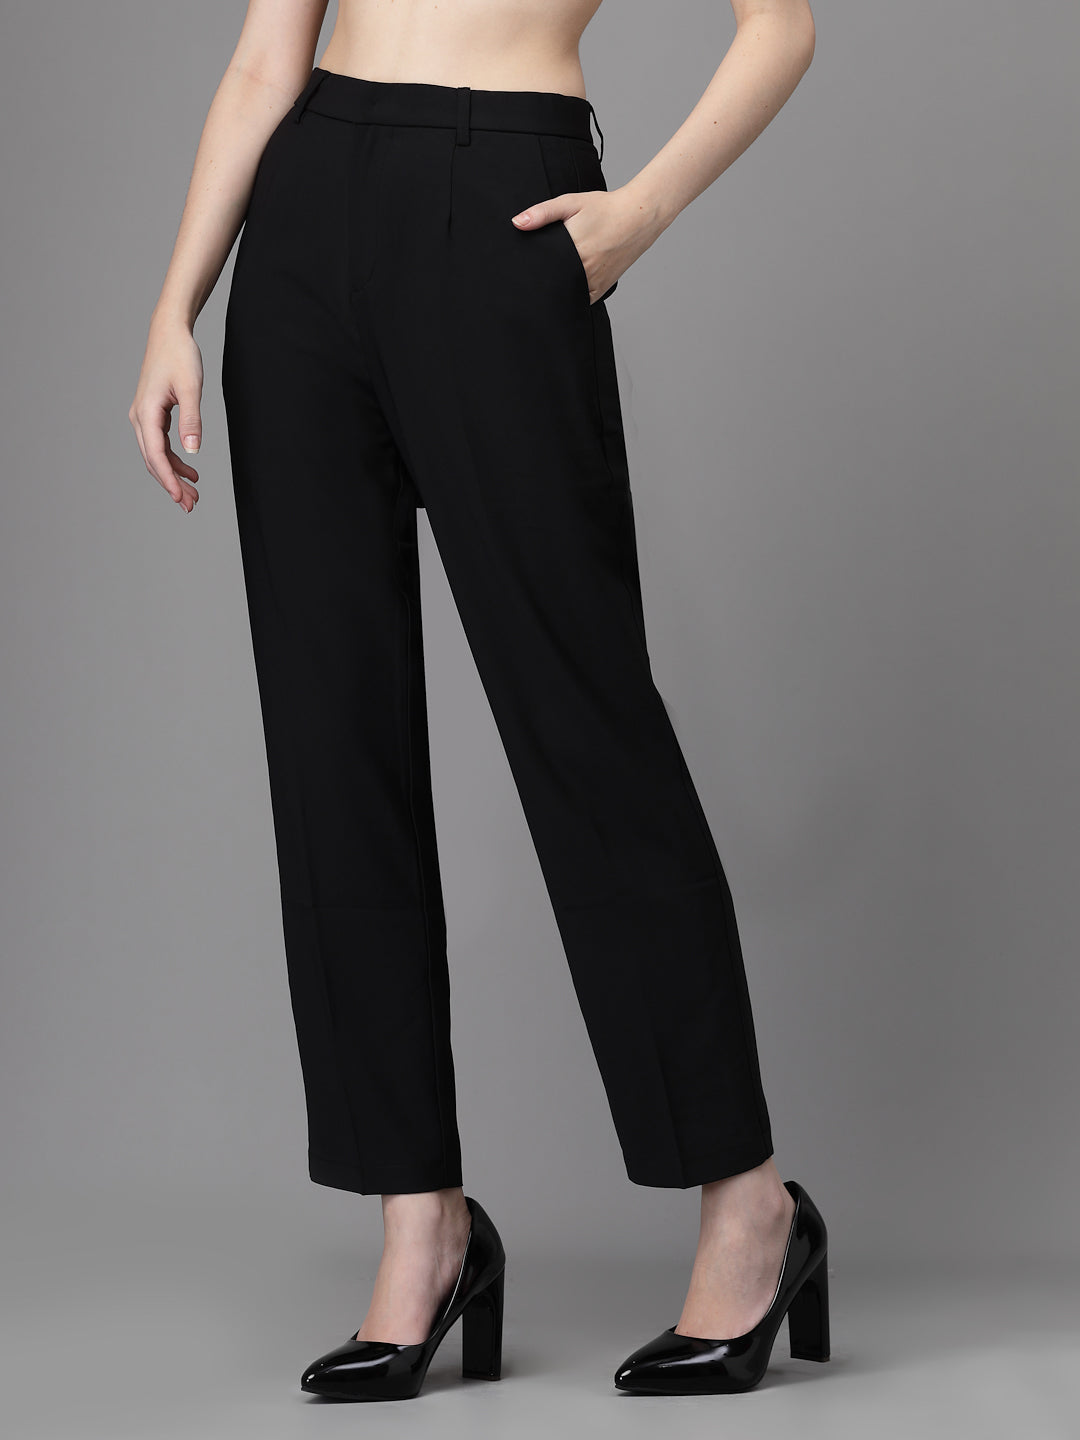 Buy GLOBAL DESI GIRLS Solid Polyester Slim Fit Girls Trousers  Shoppers  Stop